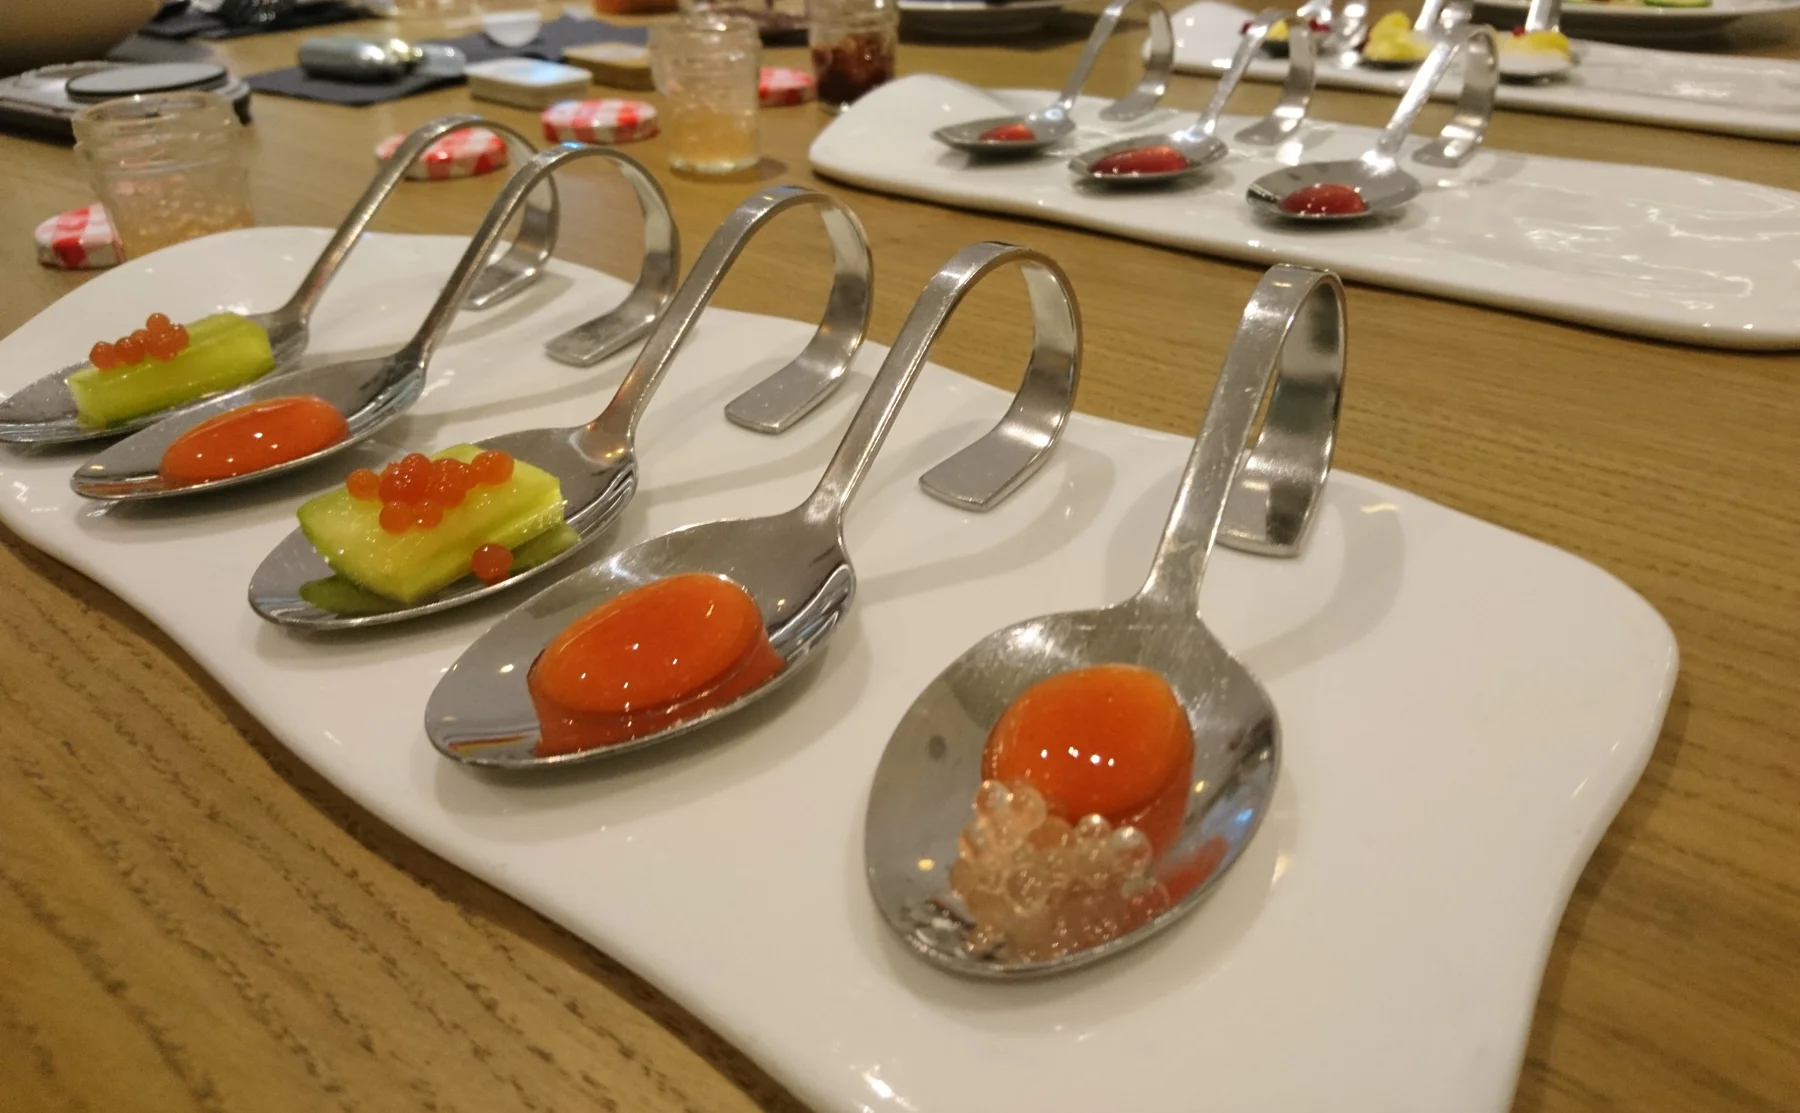 Molecular gastronomy cooking techniques and dinner in London - 1383994